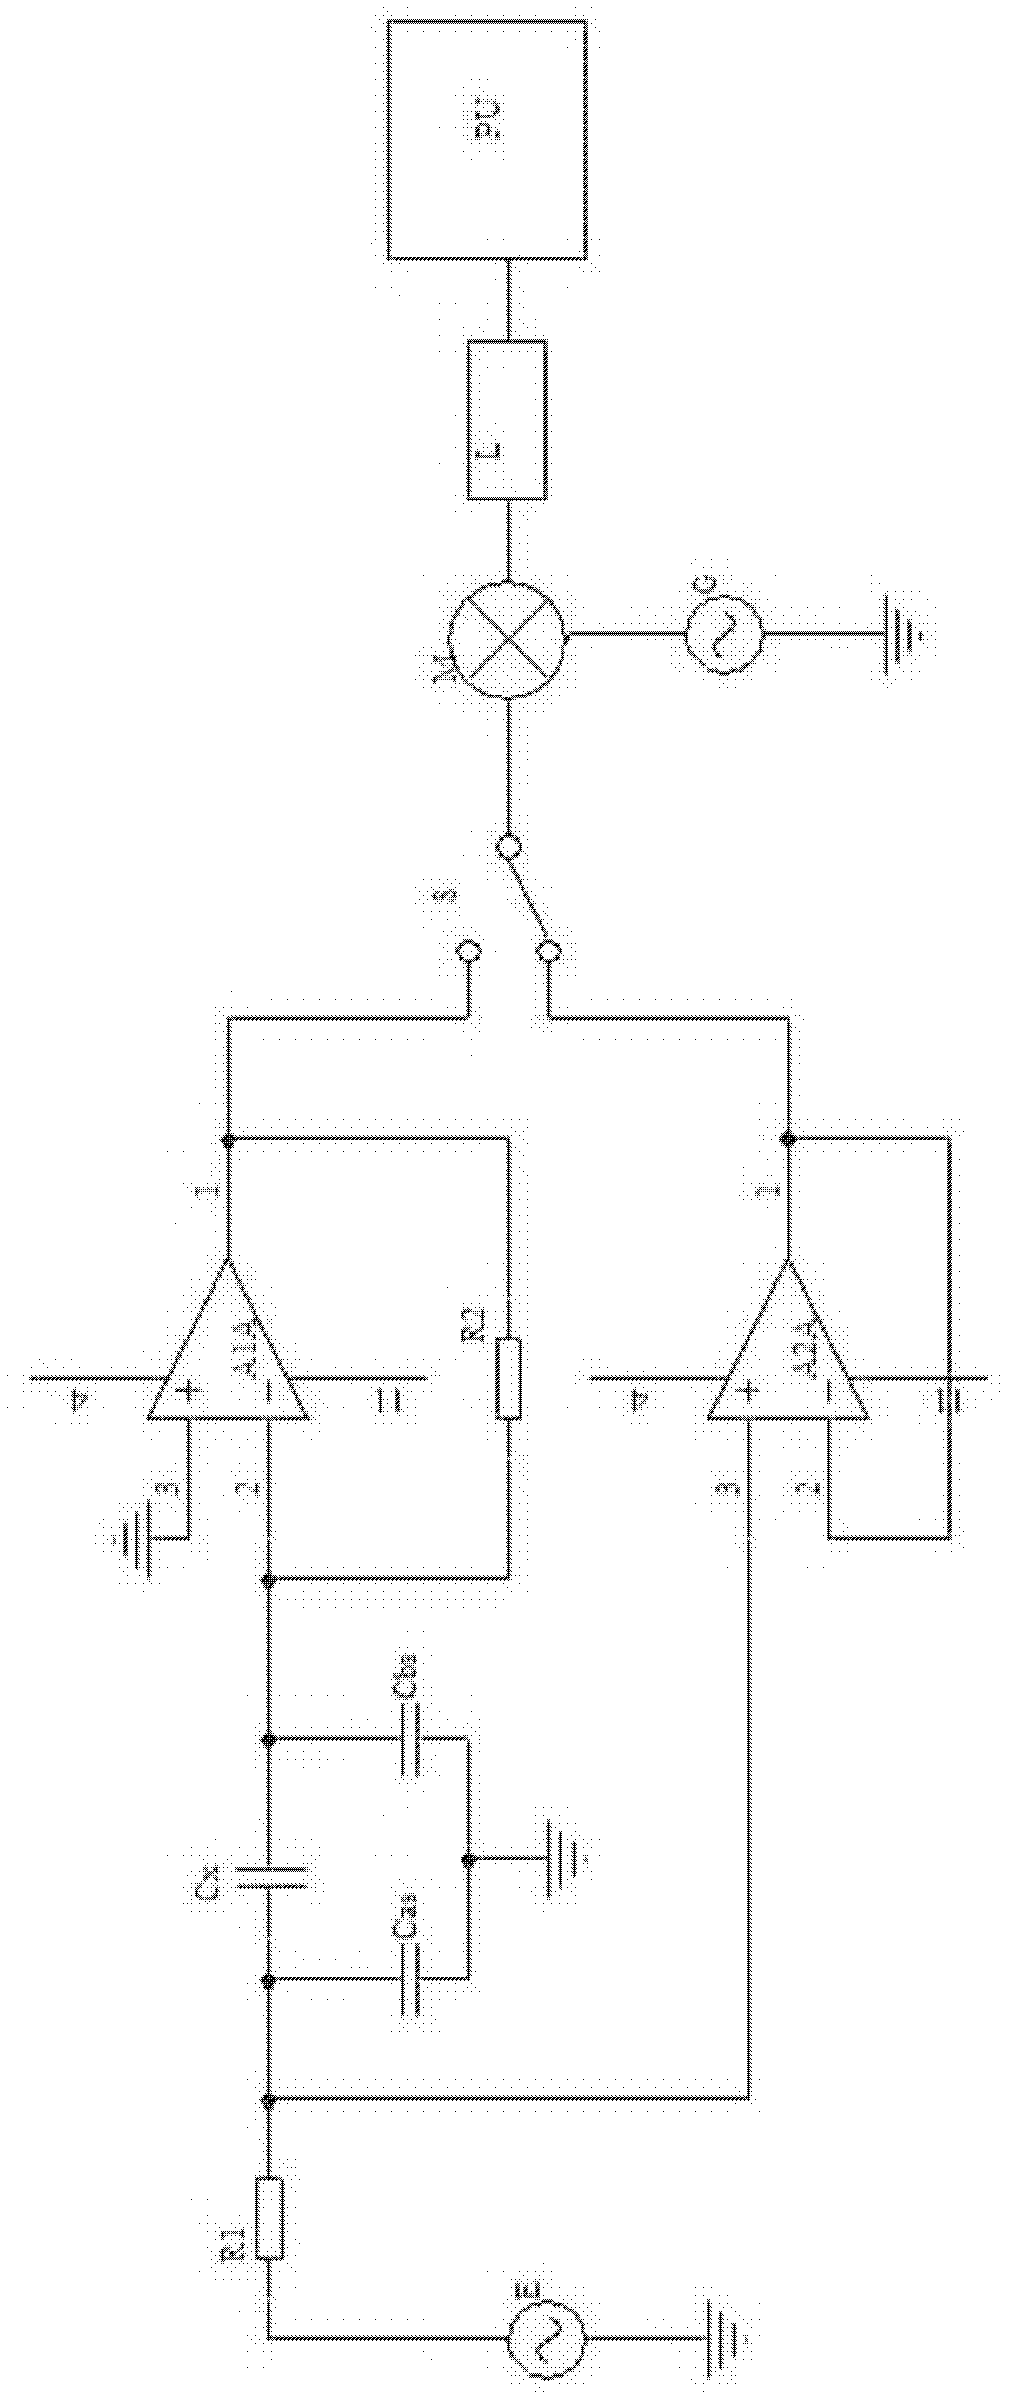 Small capacitance measurement circuit based on AC (alternating current) voltage drop balance and measurement method